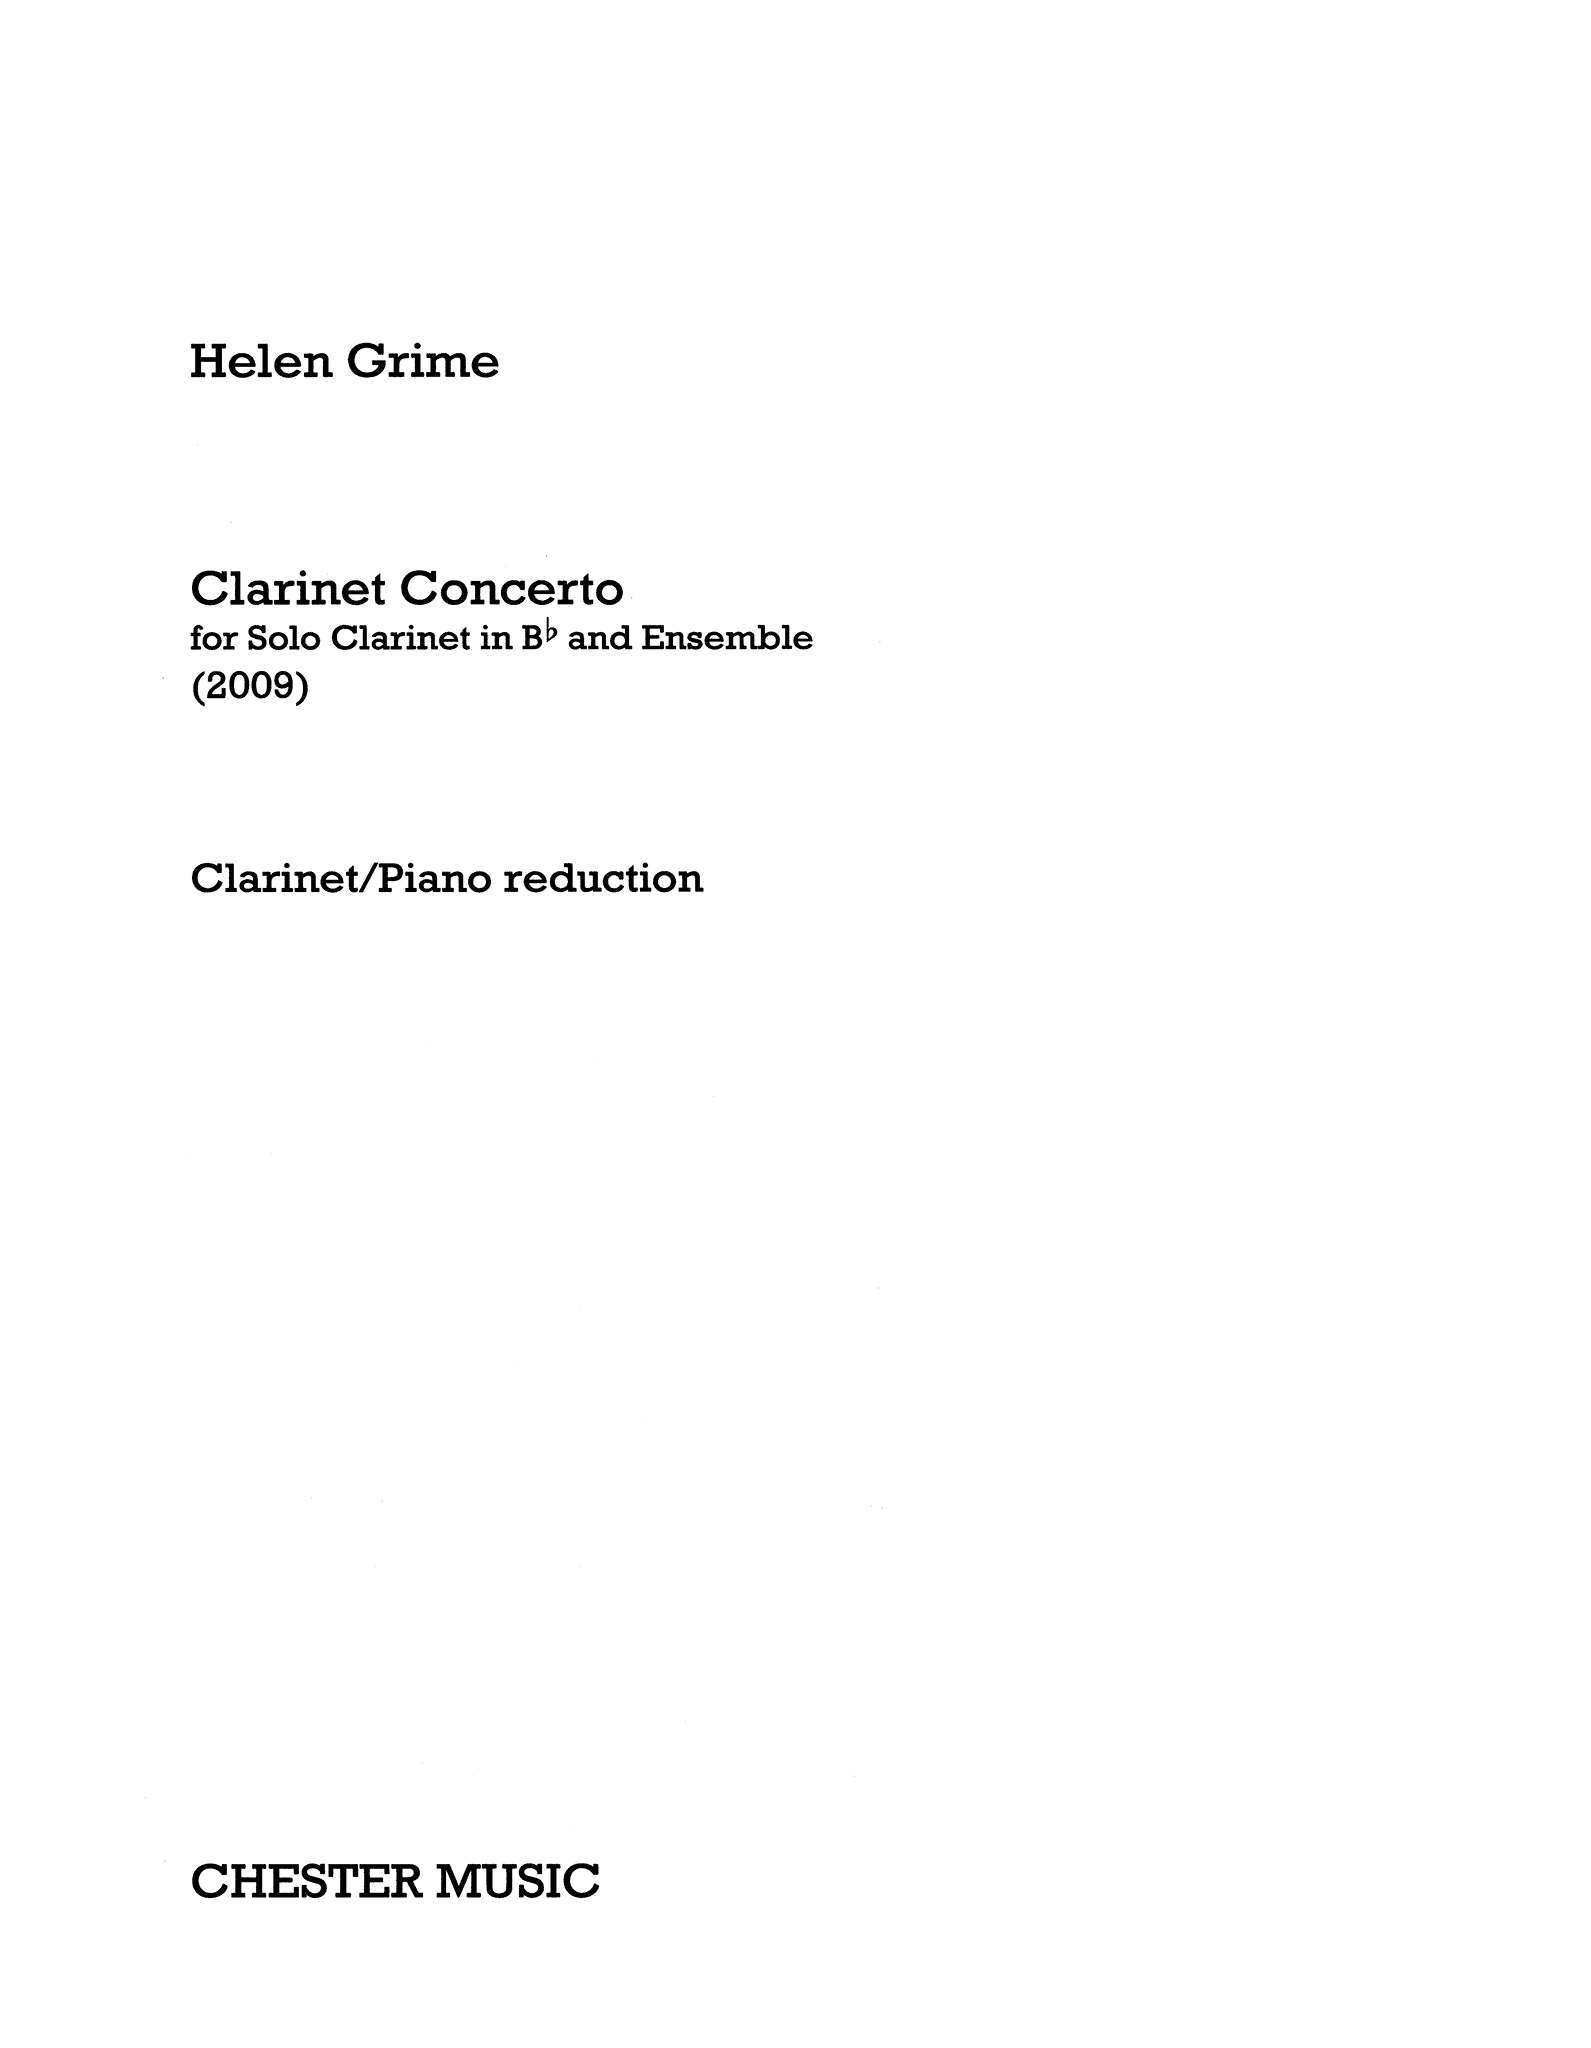 Helen Grime Clarinet Concerto piano reduction cover